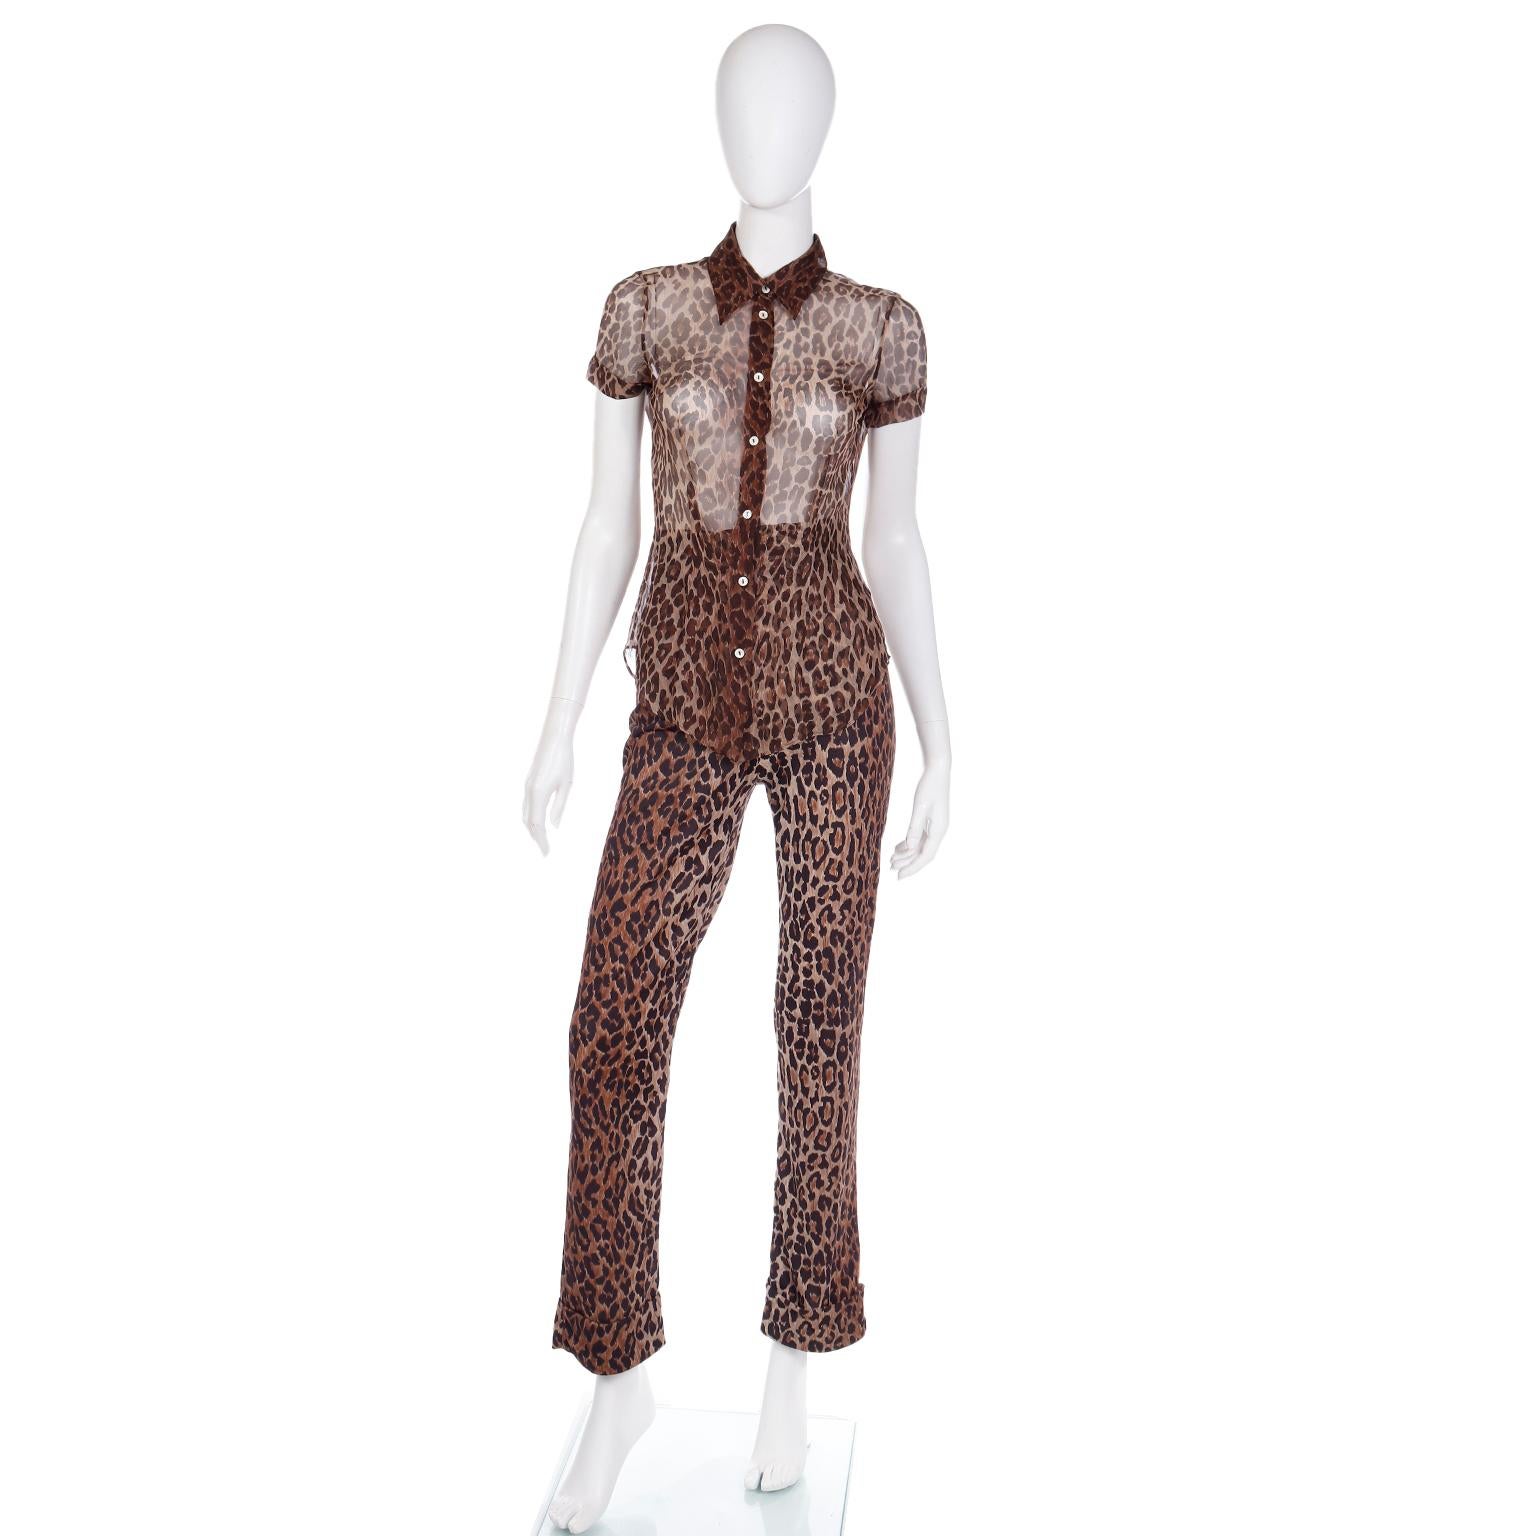 We love Dolce and Gabbana animal prints and this 2 piece outfit is in a luxe brown leopard print. The ensemble includes a sheer short sleeve button front blouse and a pair of high waisted silk trousers. The top is a sheer silk and it has a pointed